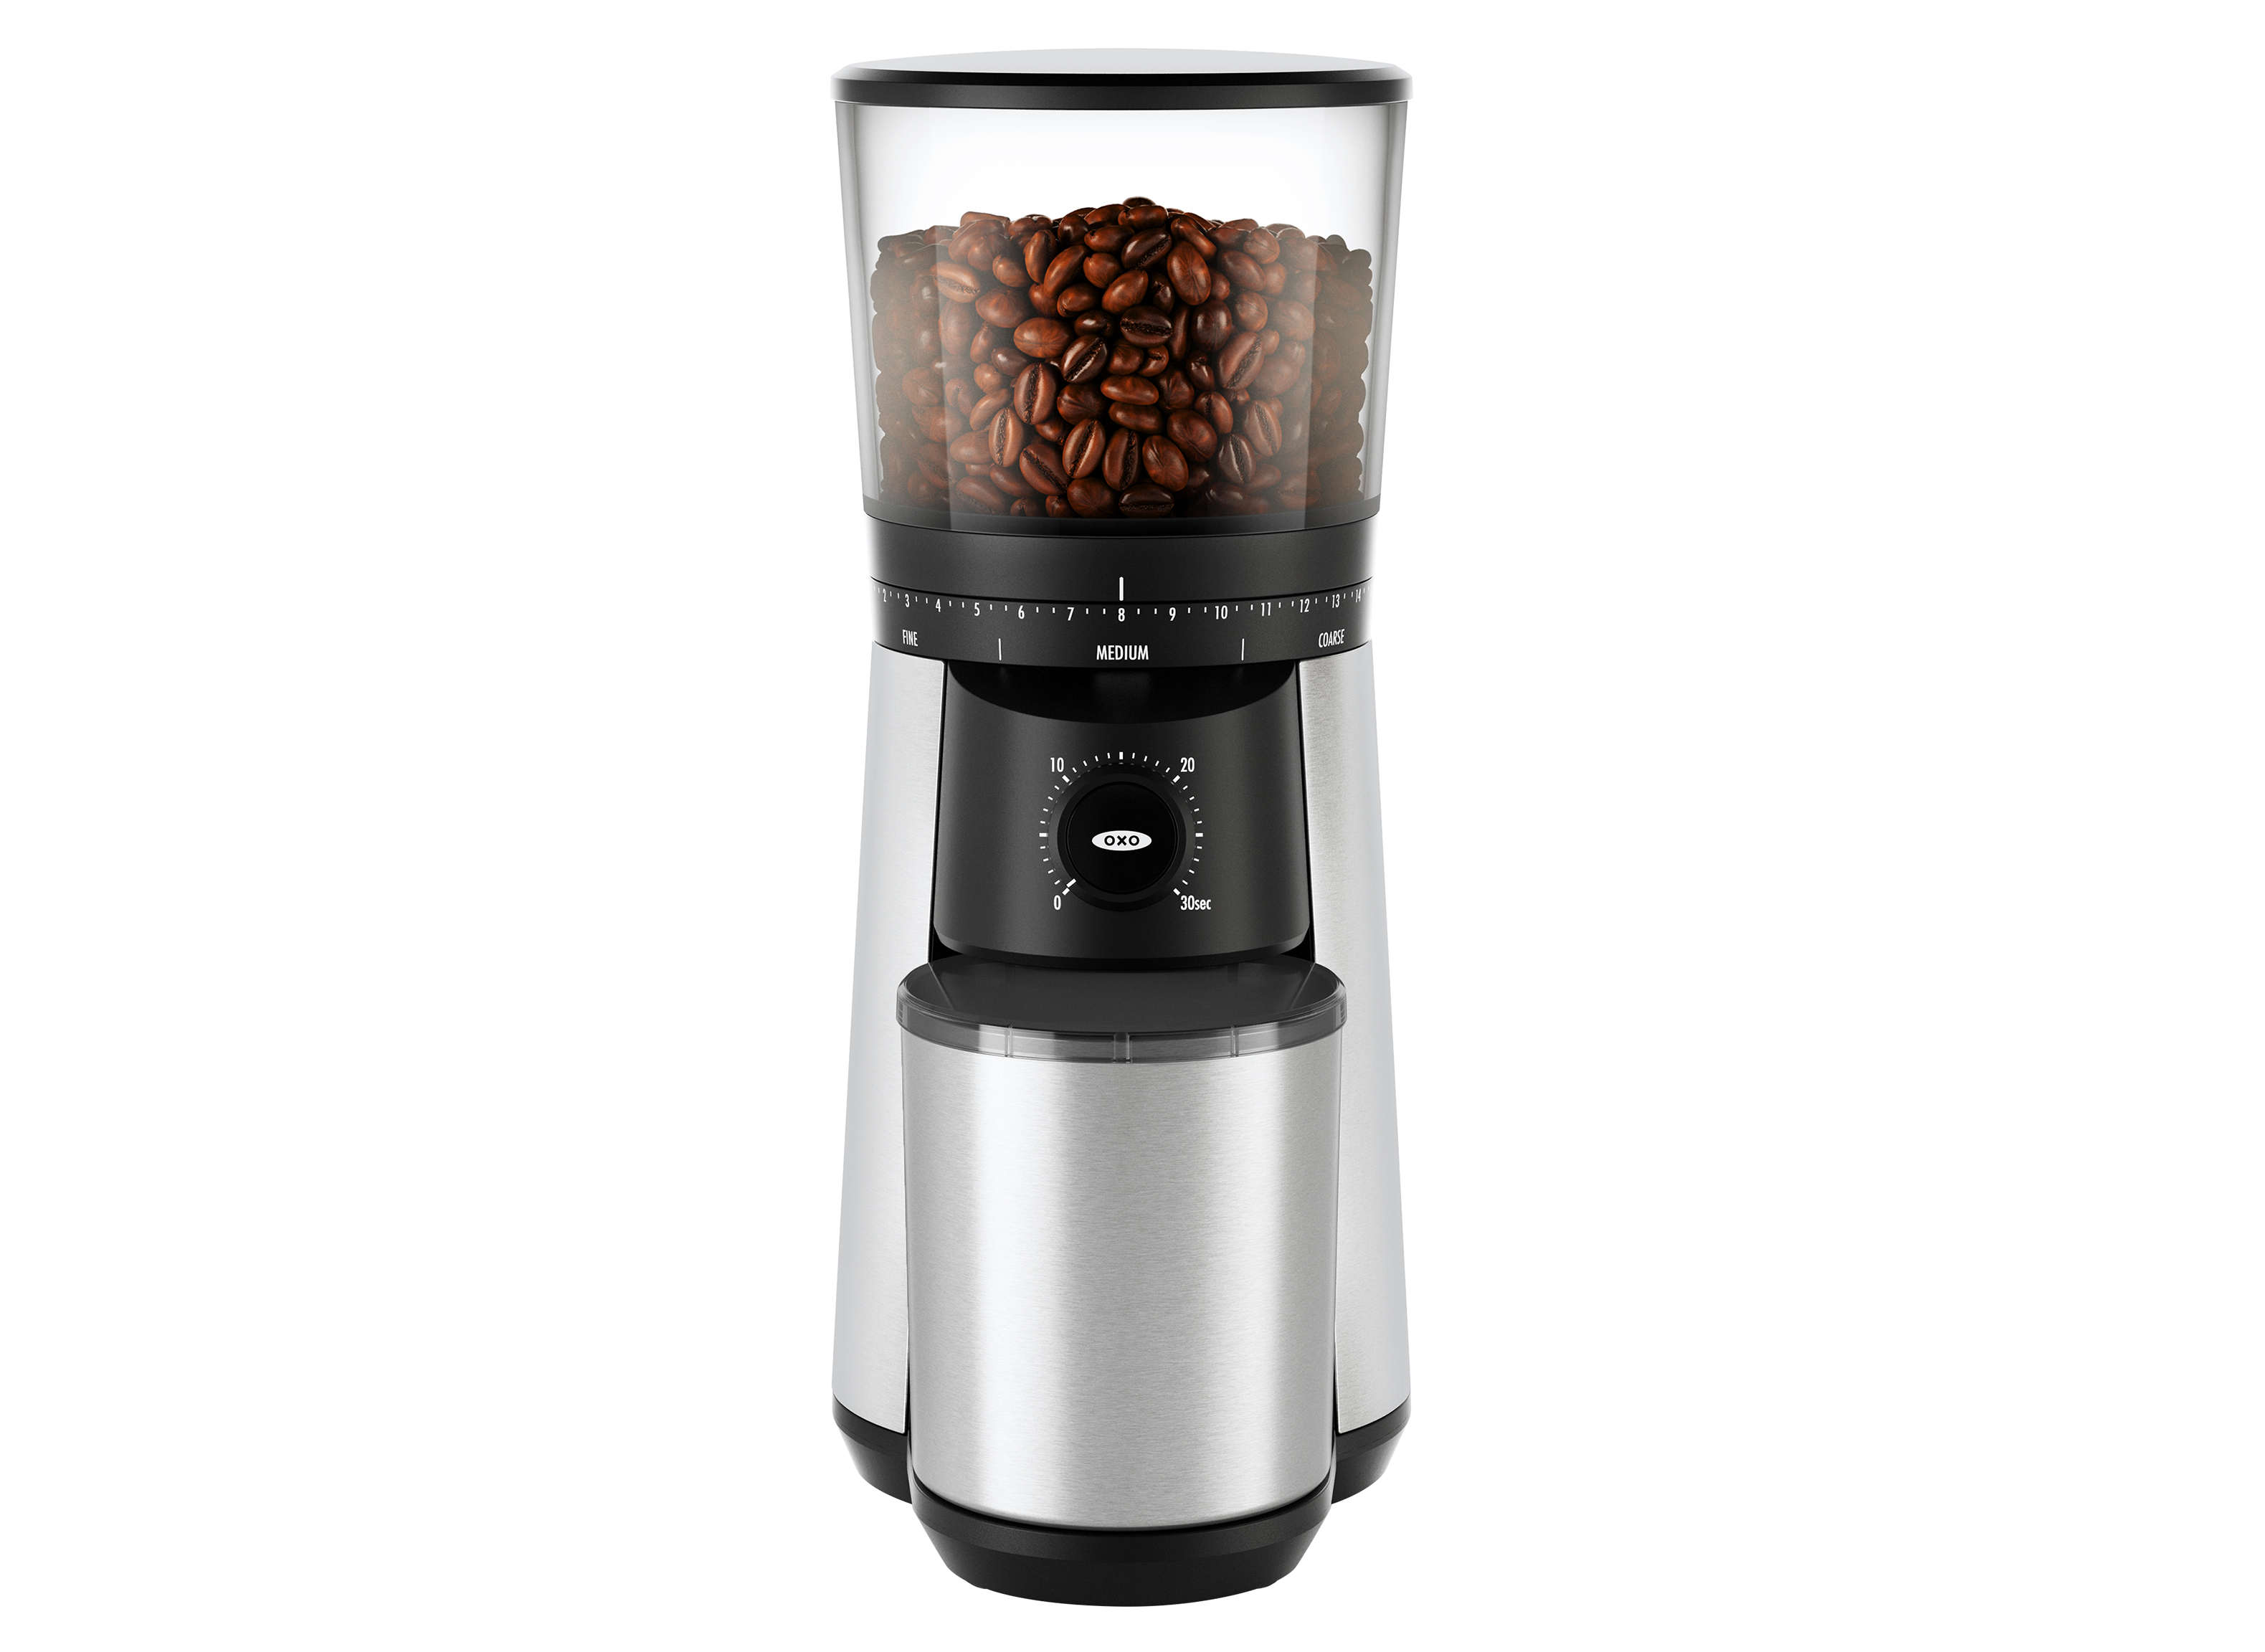 Oxo Conical Burr Coffee Grinder review: Oxo's latest coffee